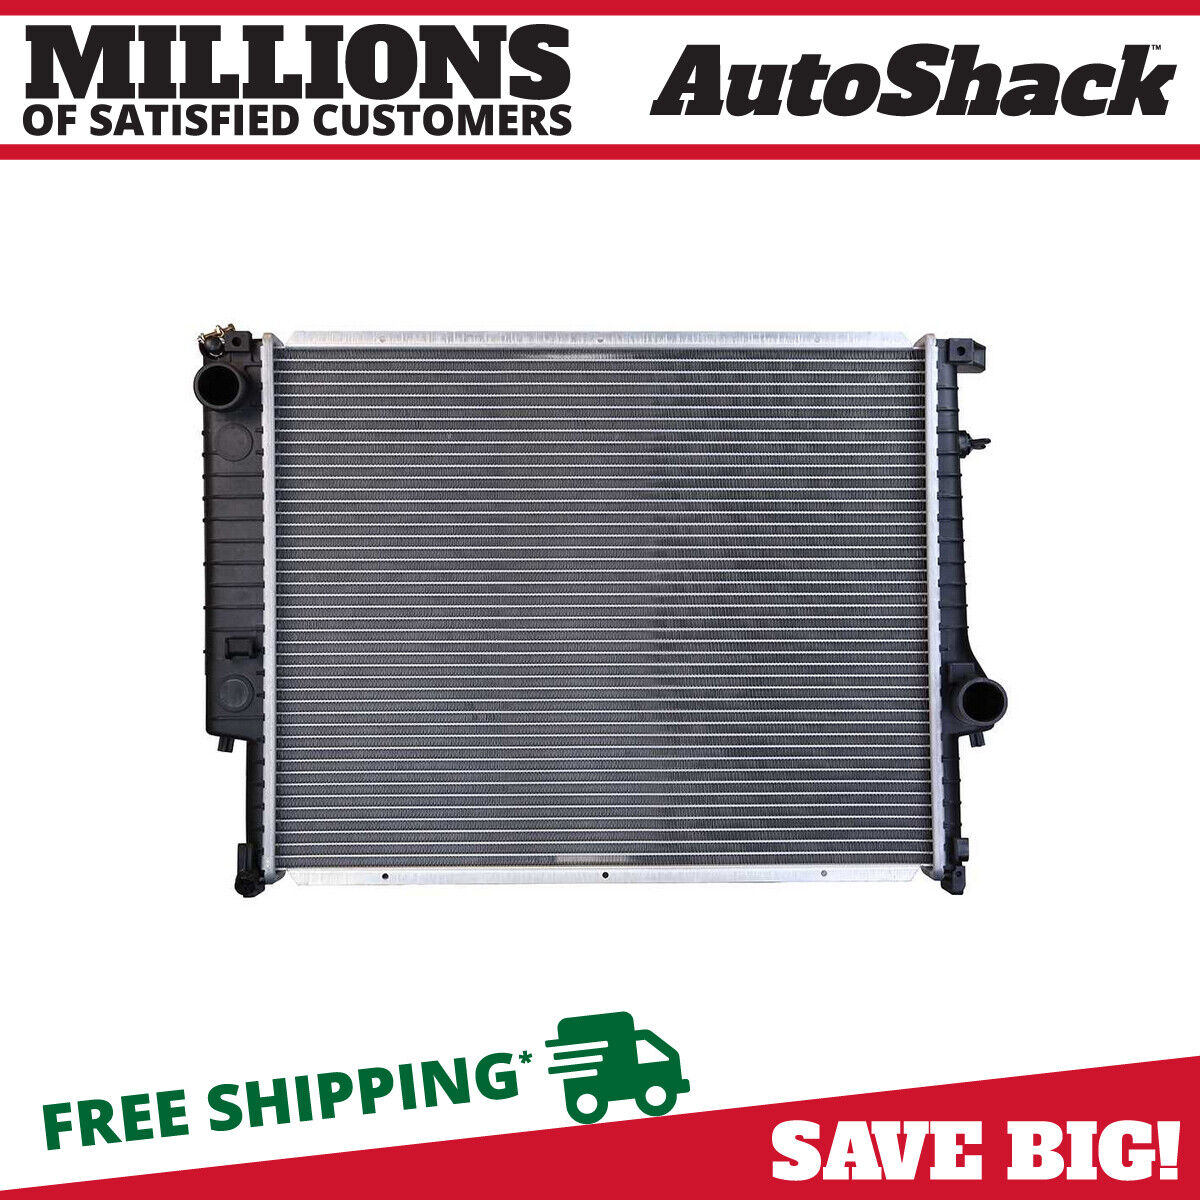 Radiator for BMW 328is 1992-1995 320i 325is 1995-1999 M3 1998 Z3 1998-1999 323is